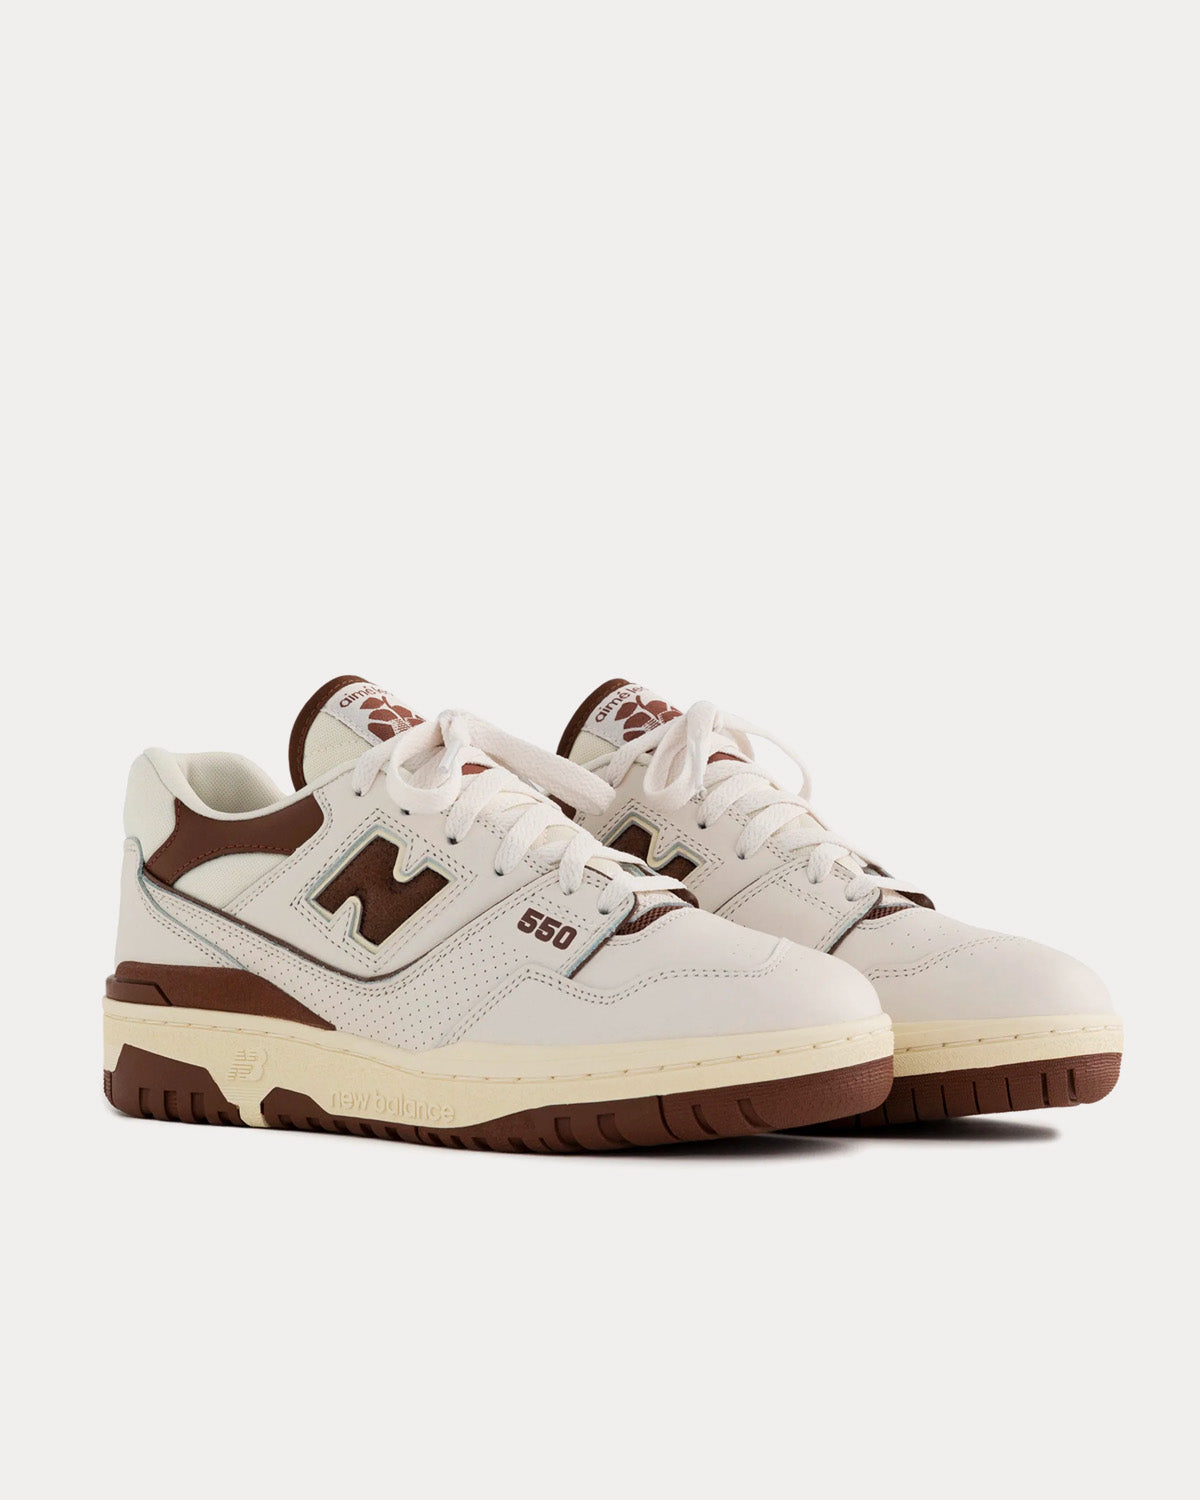 New Balance x Aime Leon Dore P550 Basketball Oxfords Brown Low Top Sneakers  - Sneak in Peace